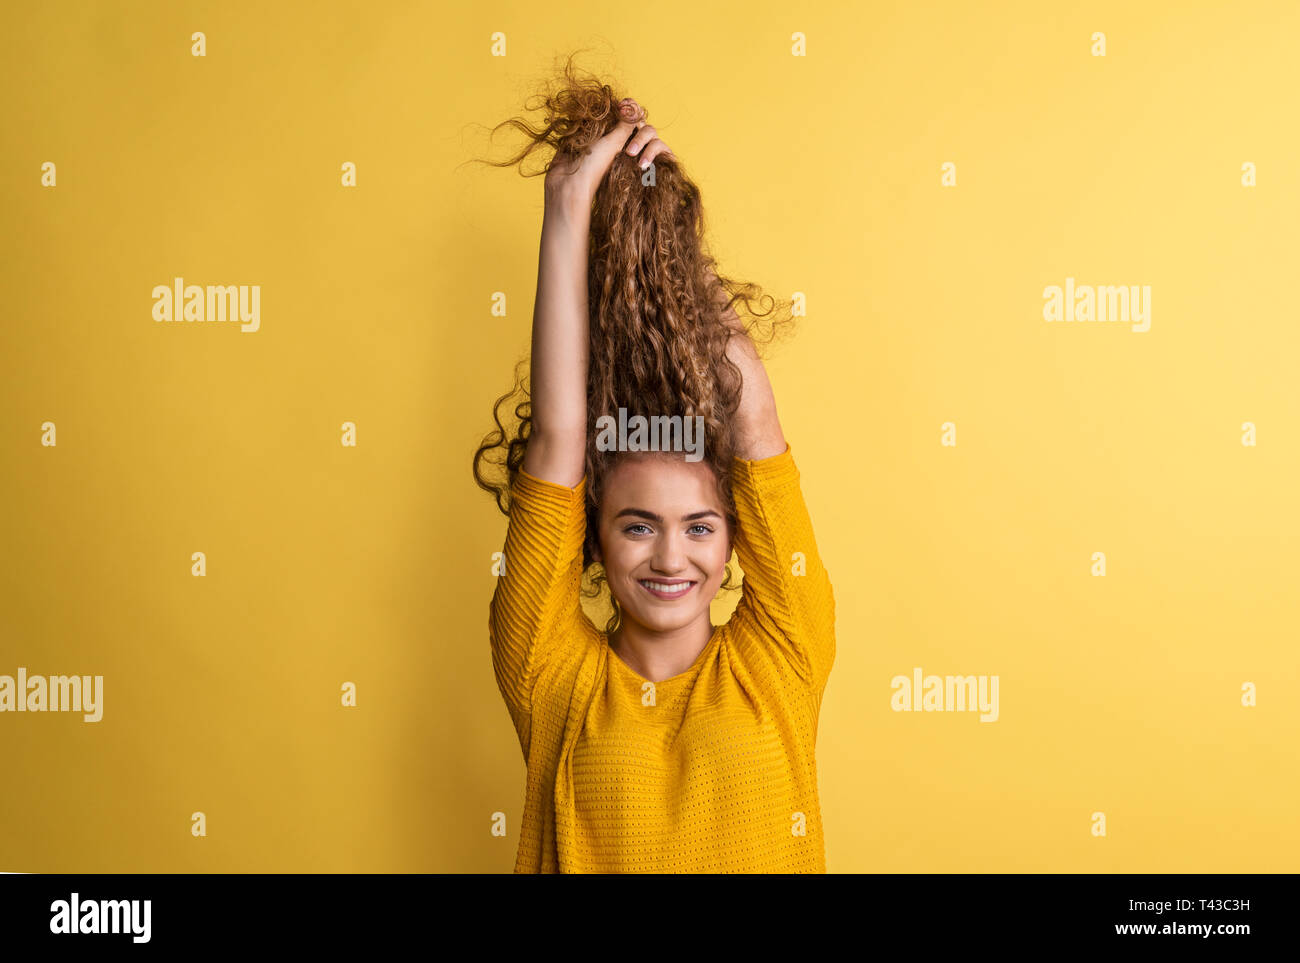 Portrait of a young woman in a studio on a yellow background, having fun. Stock Photo